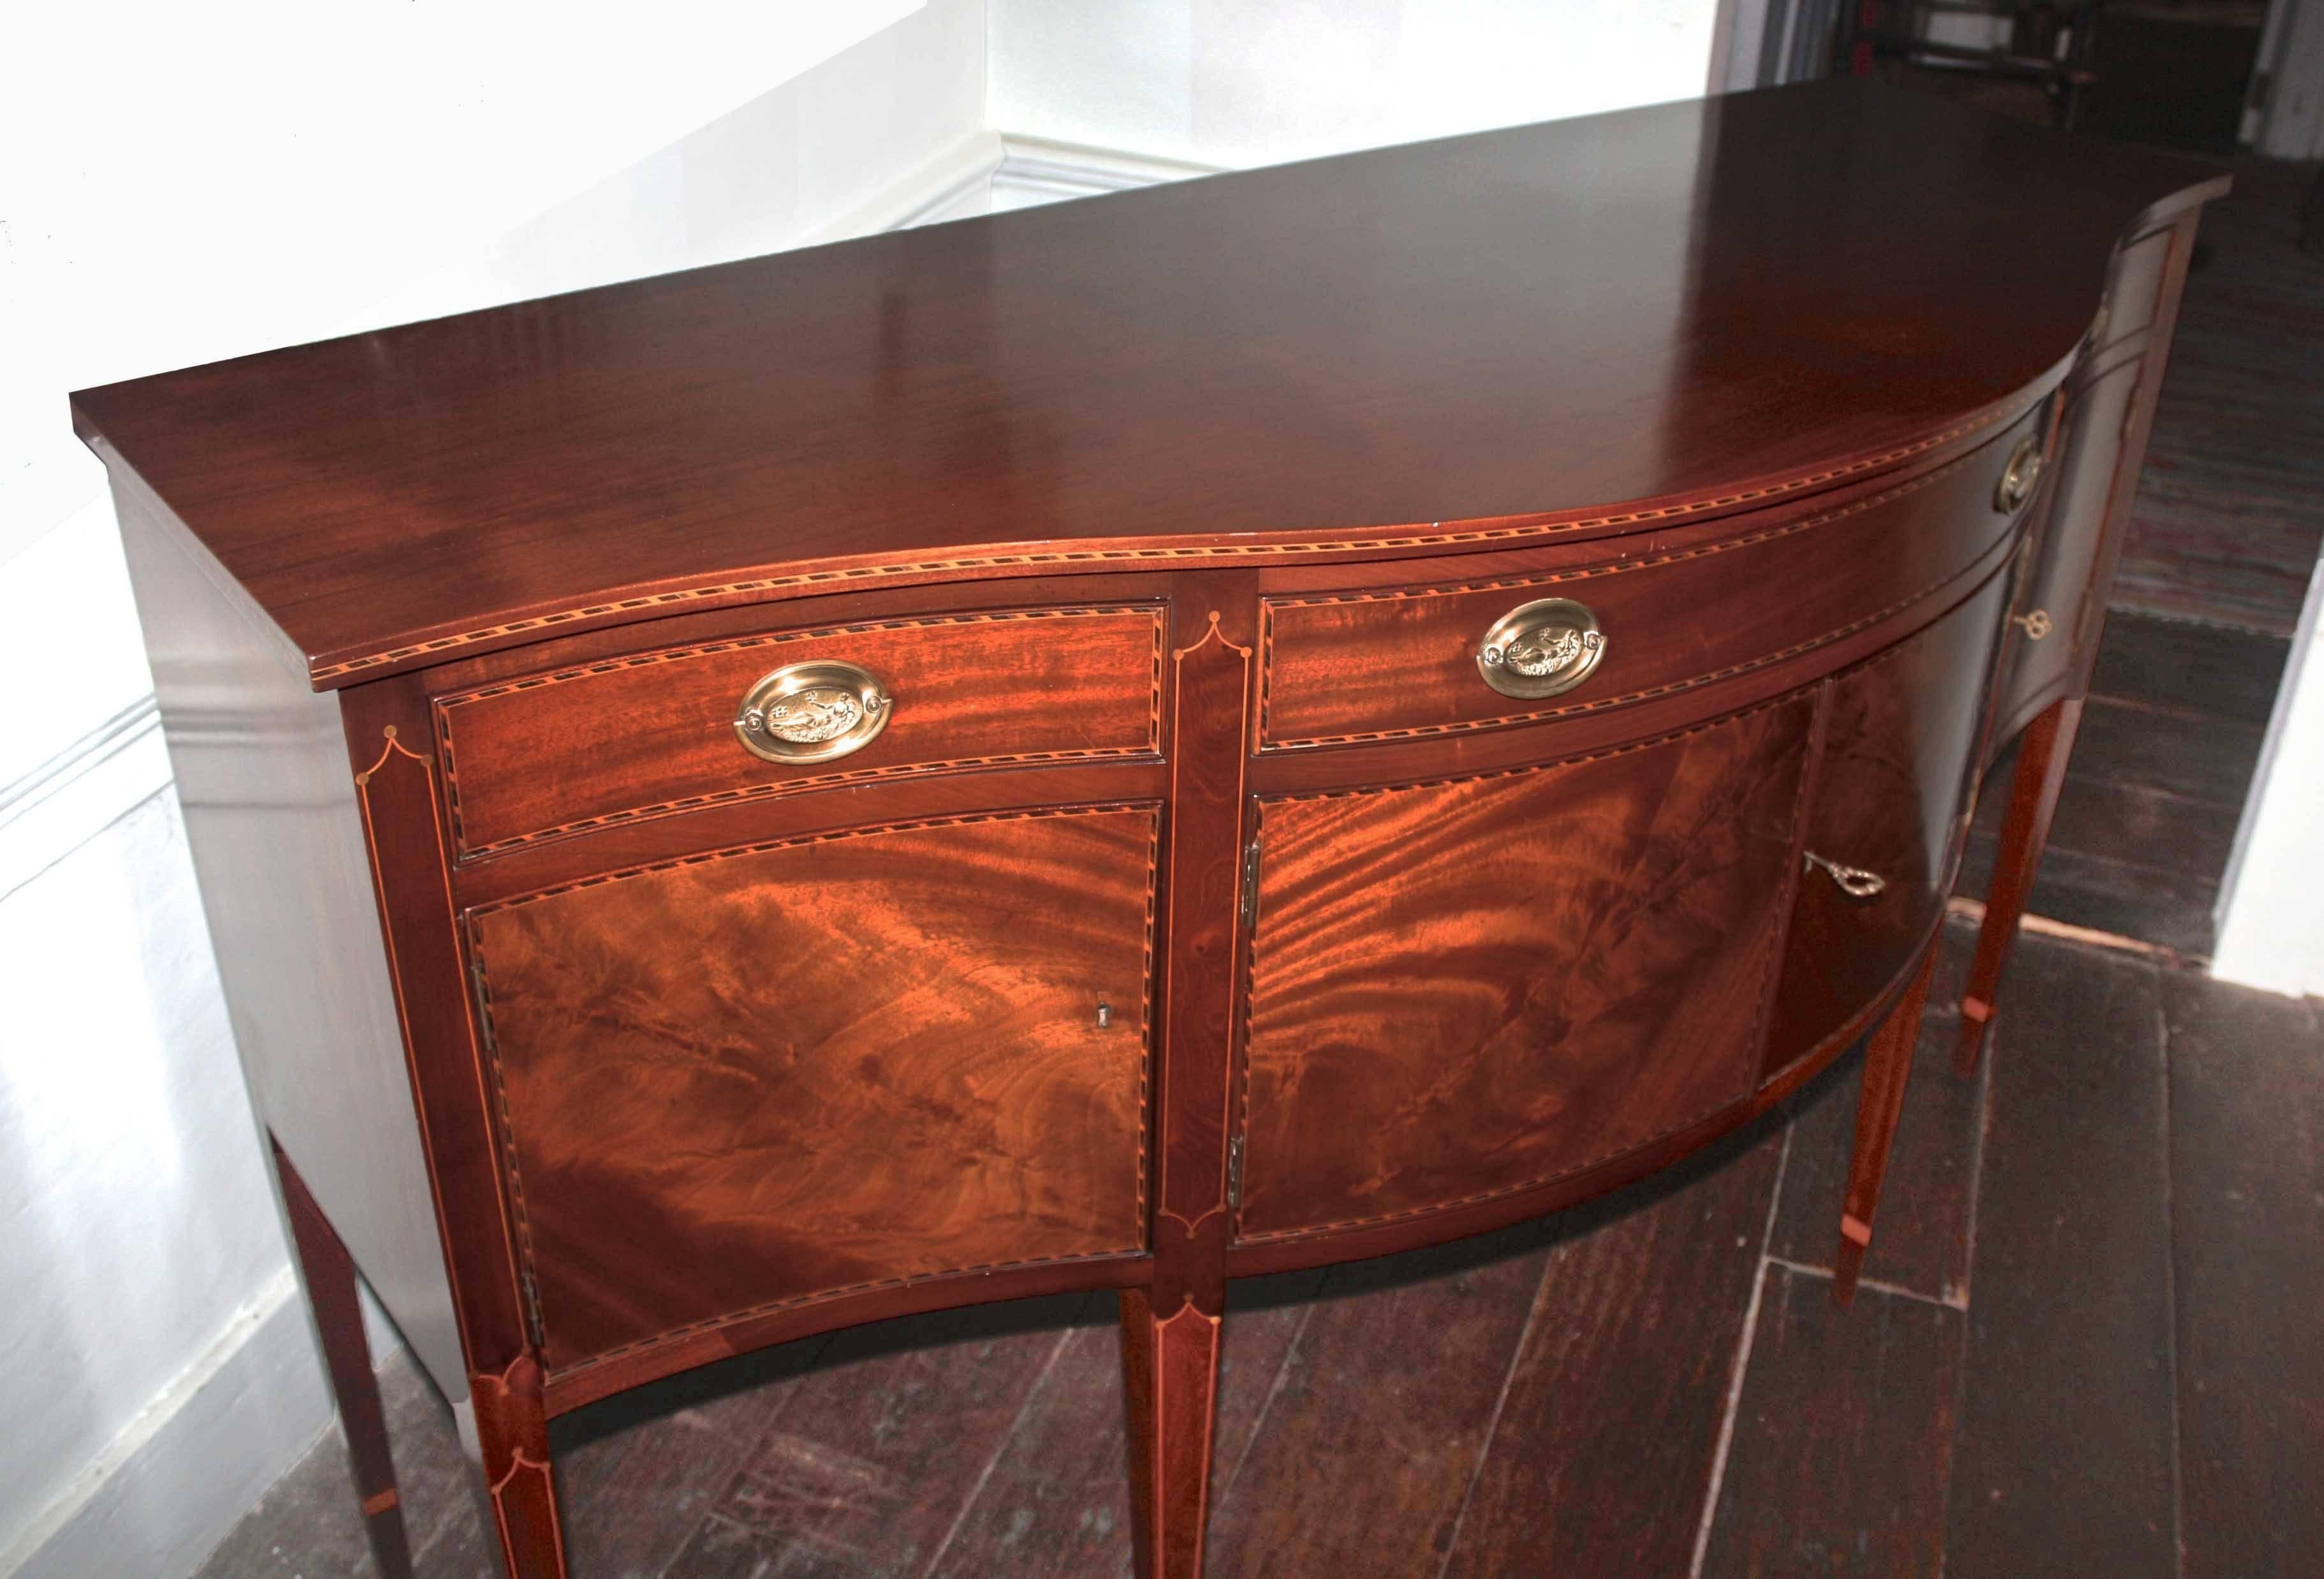 Late 19th Century American Federal Revival Inlaid Mahogany Sideboard For Sale